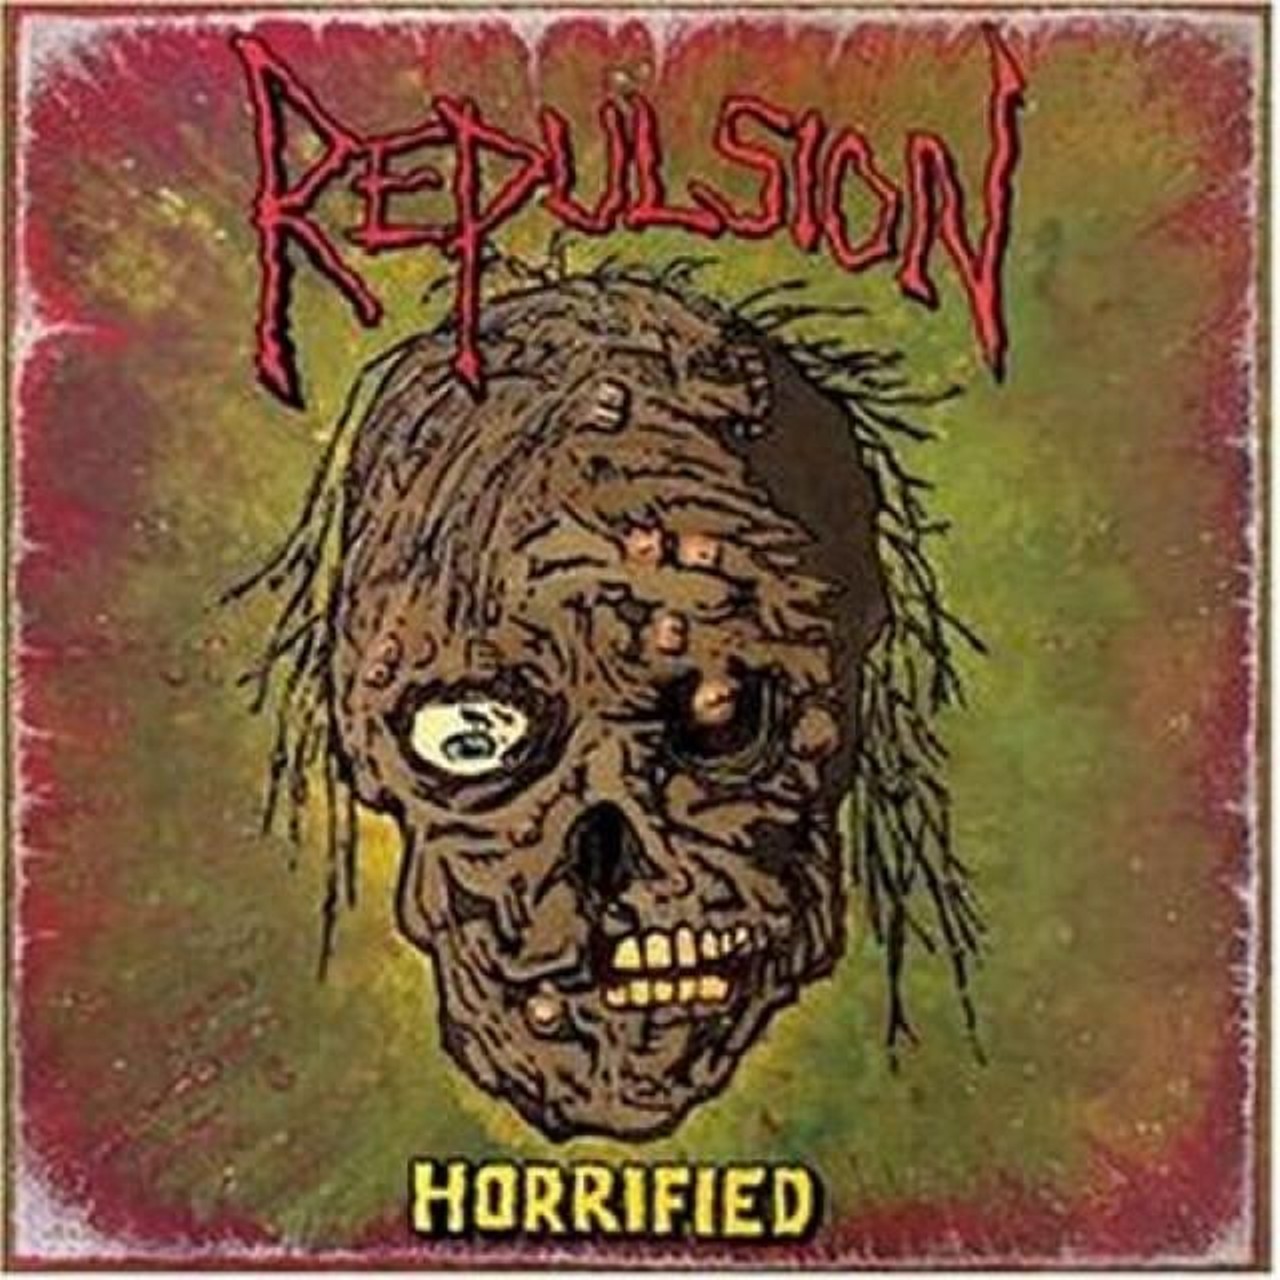 Repulsion
“The Stench of Burning Death”
A massively influential grindcore/death metal band from Flint, Repulsion prided themselves on vile imagery and disturbing lyrics. The band formed in ’84, and would cover tunes by bands like Slayer and Metallica in the early days. They soon found their own poetic niche though. This little ditty contains the lines, “Eating flesh to stay alive – Cannibals, Decaying bodies everywhere - Smell the stench, Burning bodies lay in mess - Foul gore, Radiation burns your lungs - Rabid death.” 
EVERYBODY SING ALONG!